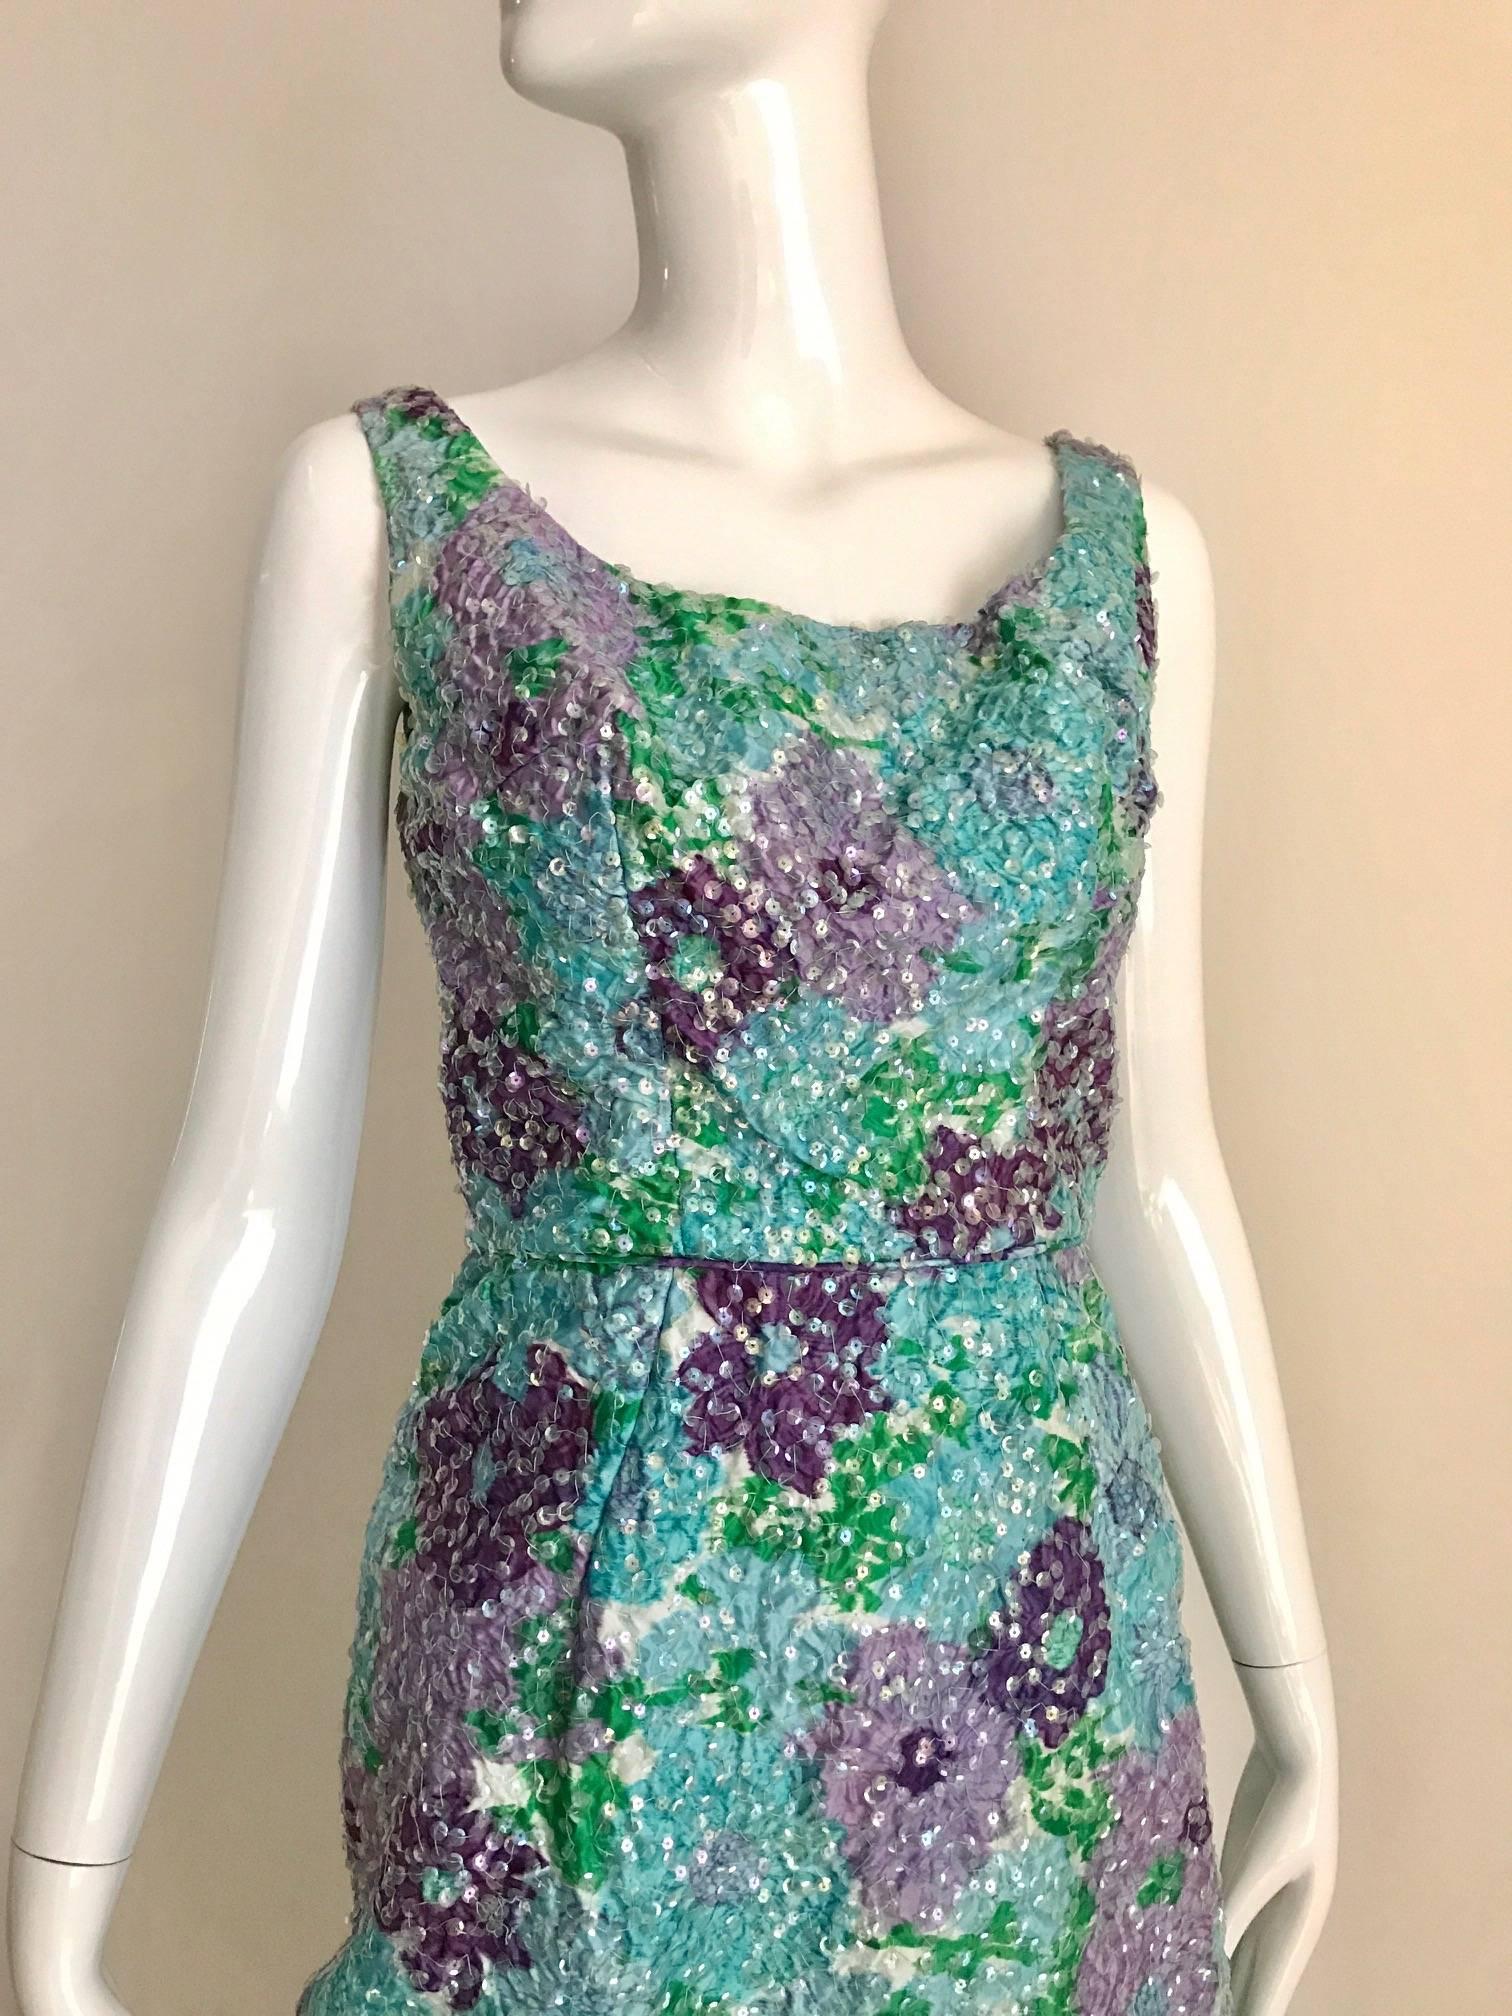 Late 1950s and early 1960s vintage cotton watercolor  floral print sheath dress. Iridescent clear sequins sewn all over the flower prints. Sleeveless Sheath wiggle style. The skirt has a back walking slit. Nylon zipper up the back. Bodice lined in